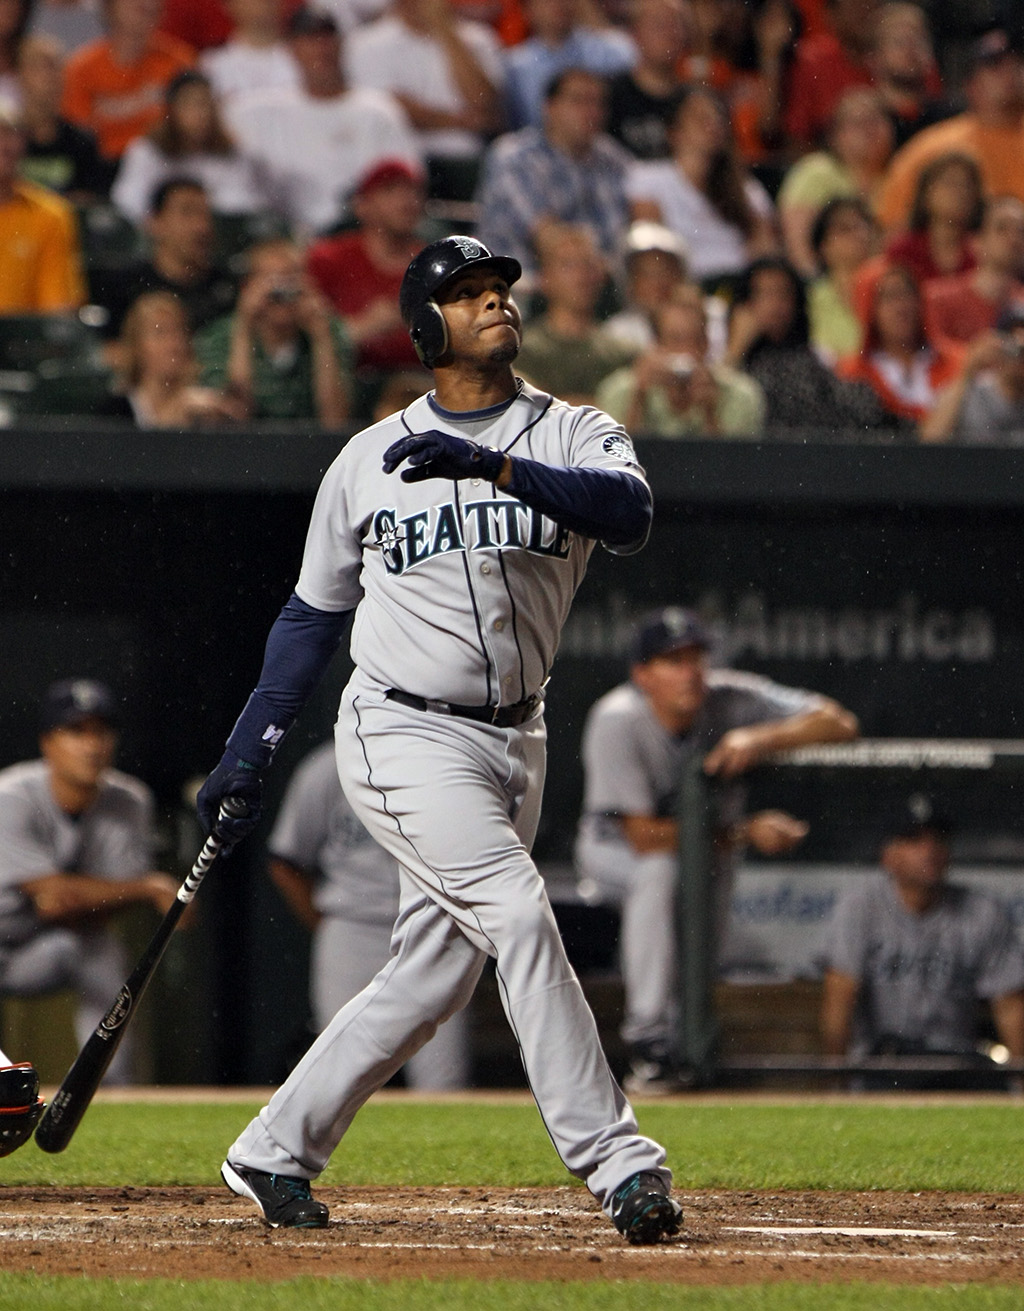 Ken Griffey Jr. retires from baseball on June 2, 2010, ending the most  accomplished and celebrated career in Seattle Mariners history. 